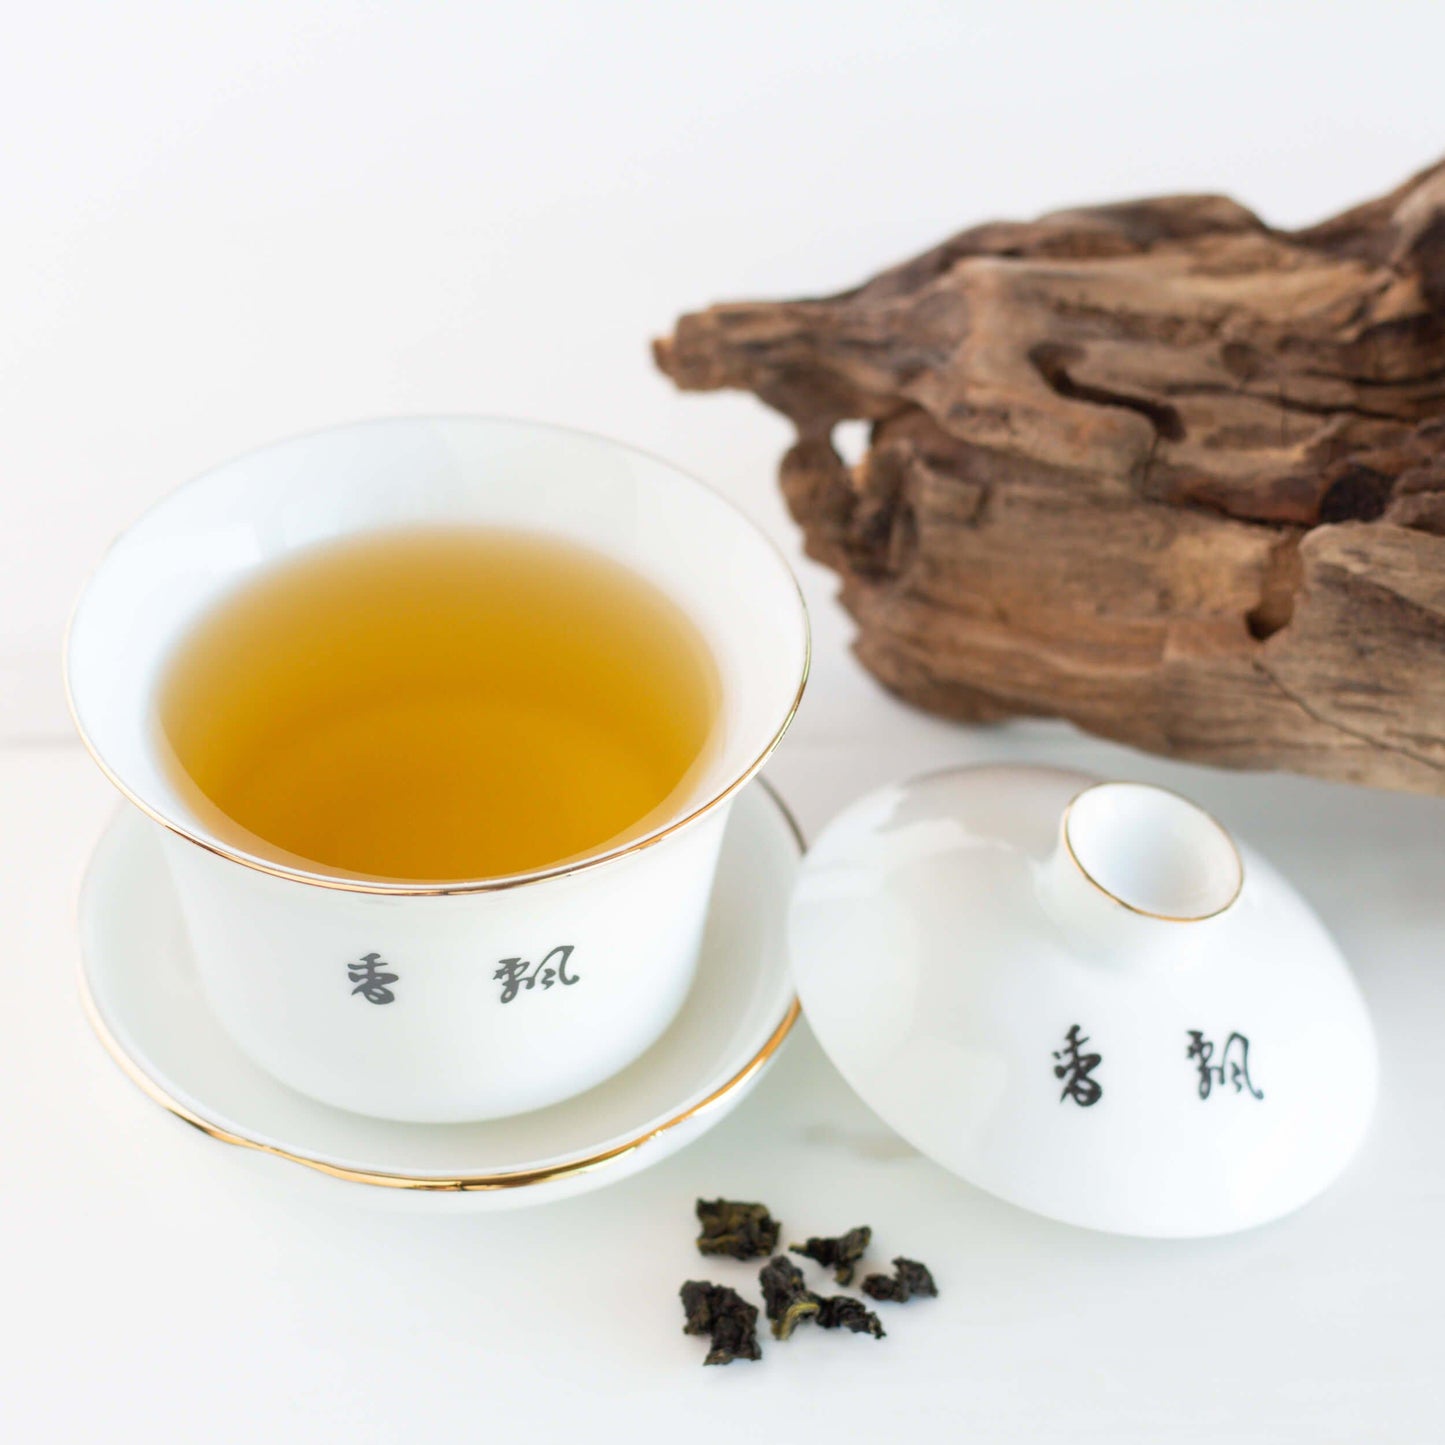 Milk Oolong Tea shown as brewed tea in a white gaiwan cup with the lid off. A piece of driftwood is in the background